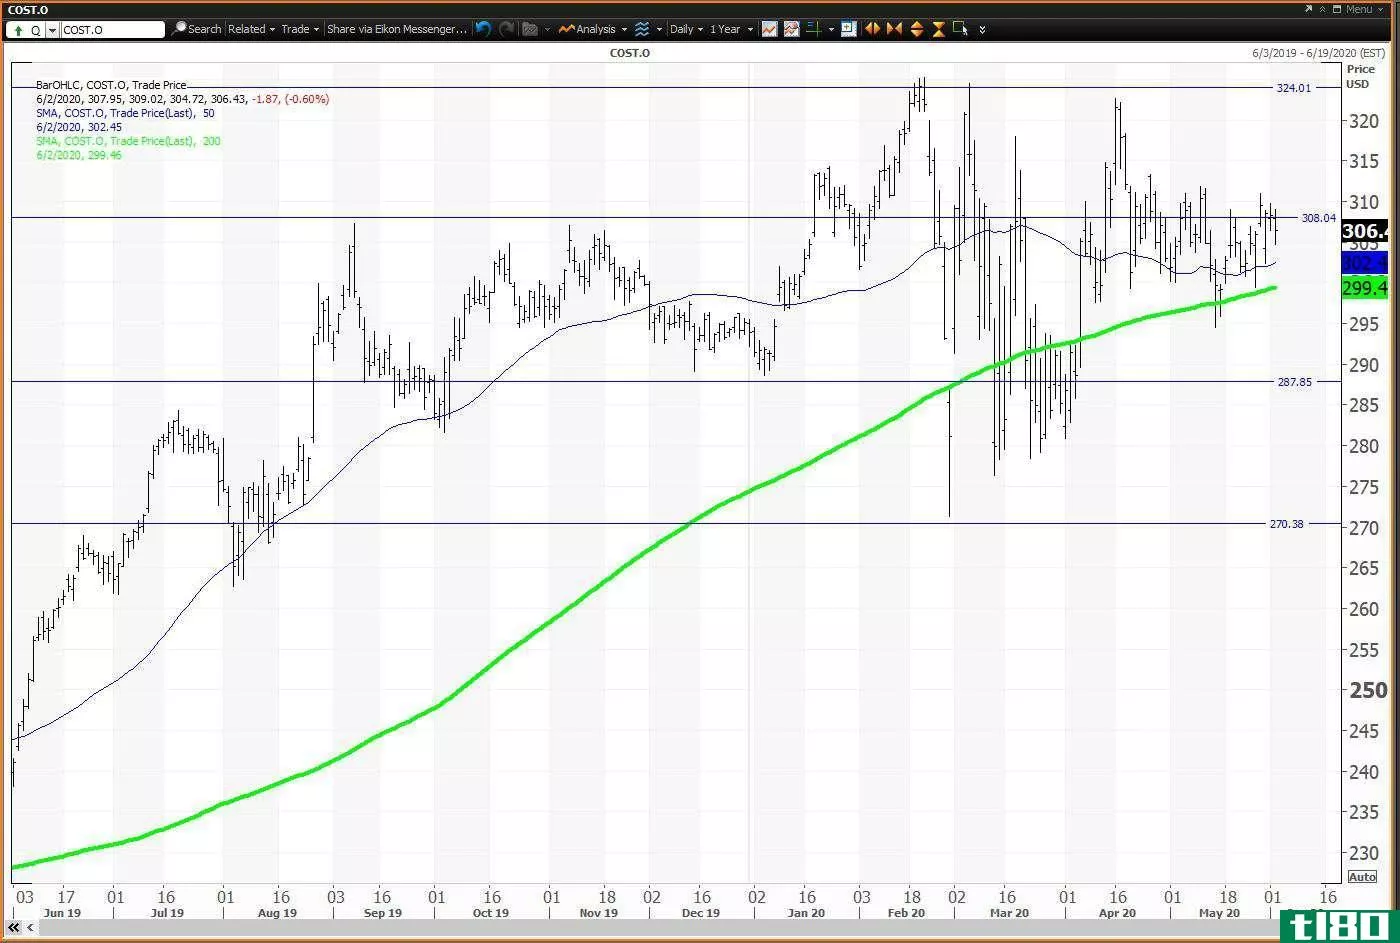 Daily chart showing the share price performance of Costco Wholesale Corporation (COST)